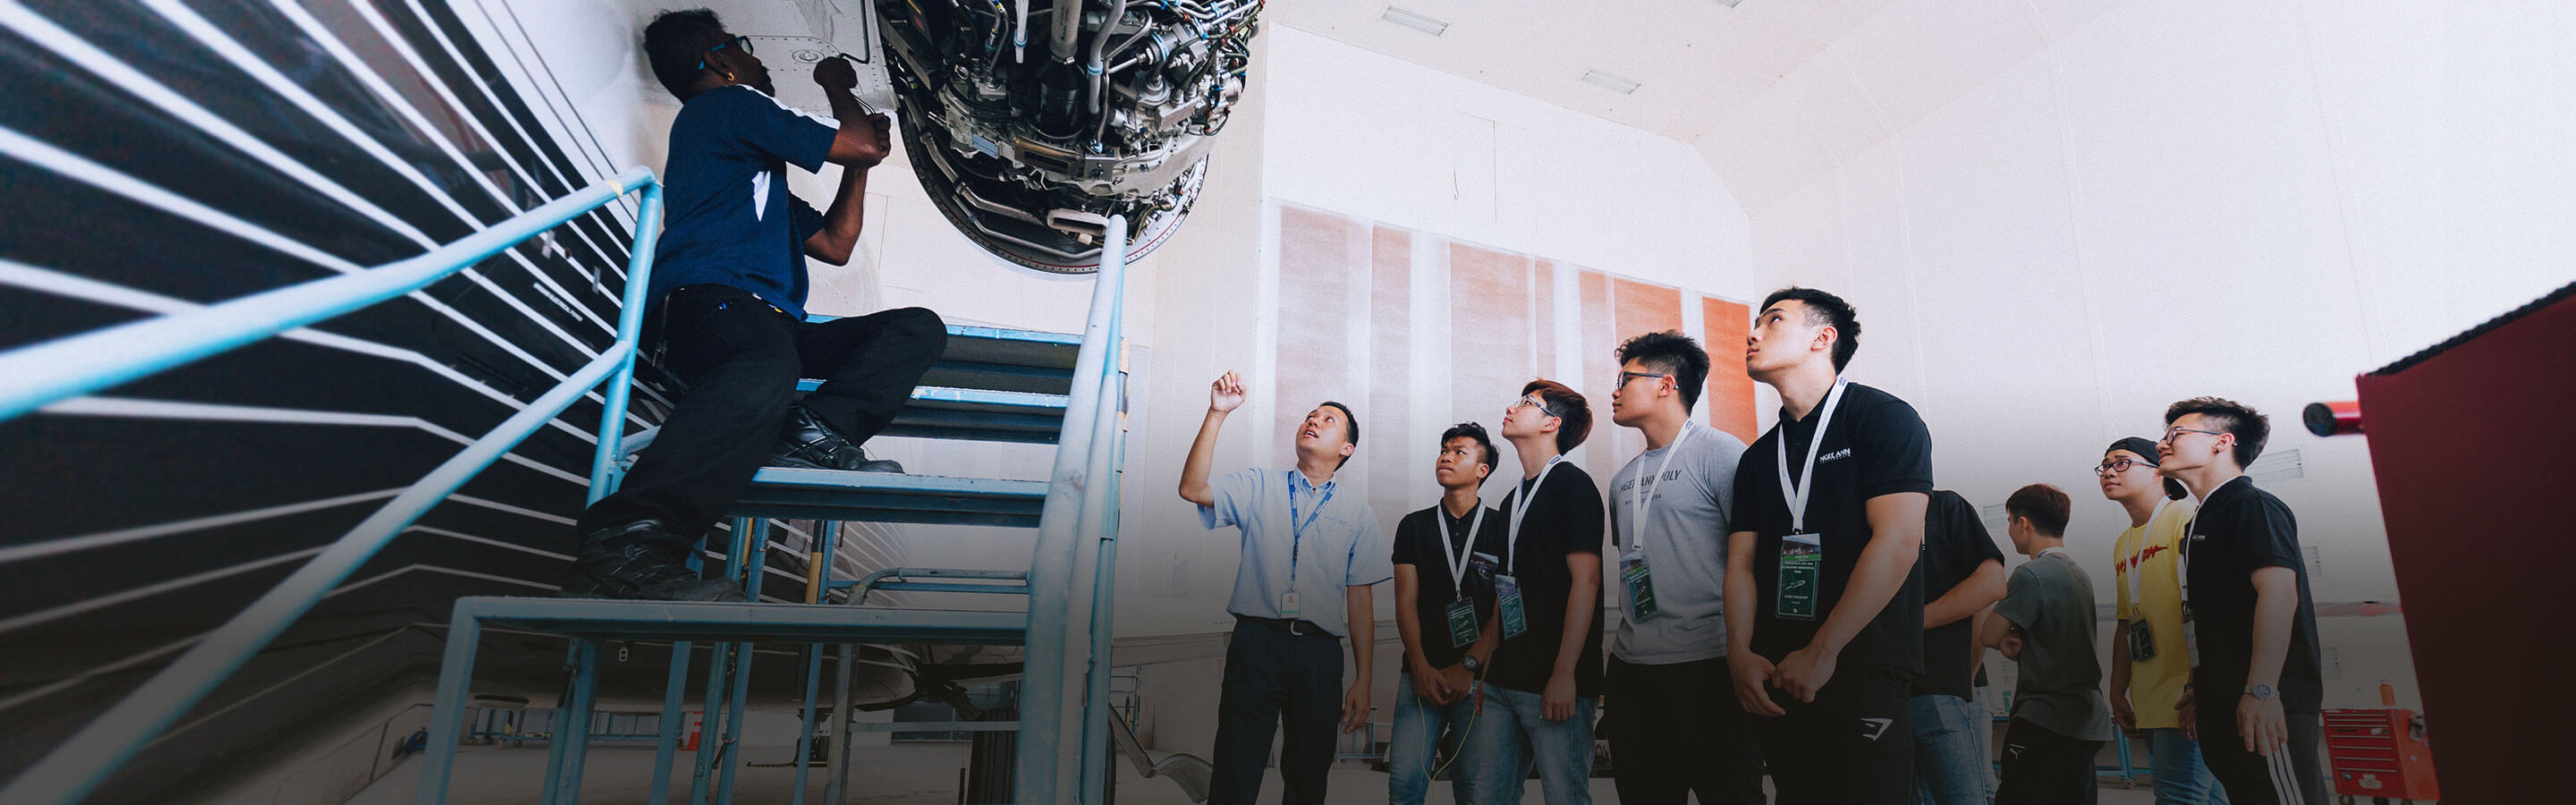 A man leading a group of guests on a tour of an advanced manufacturing facility